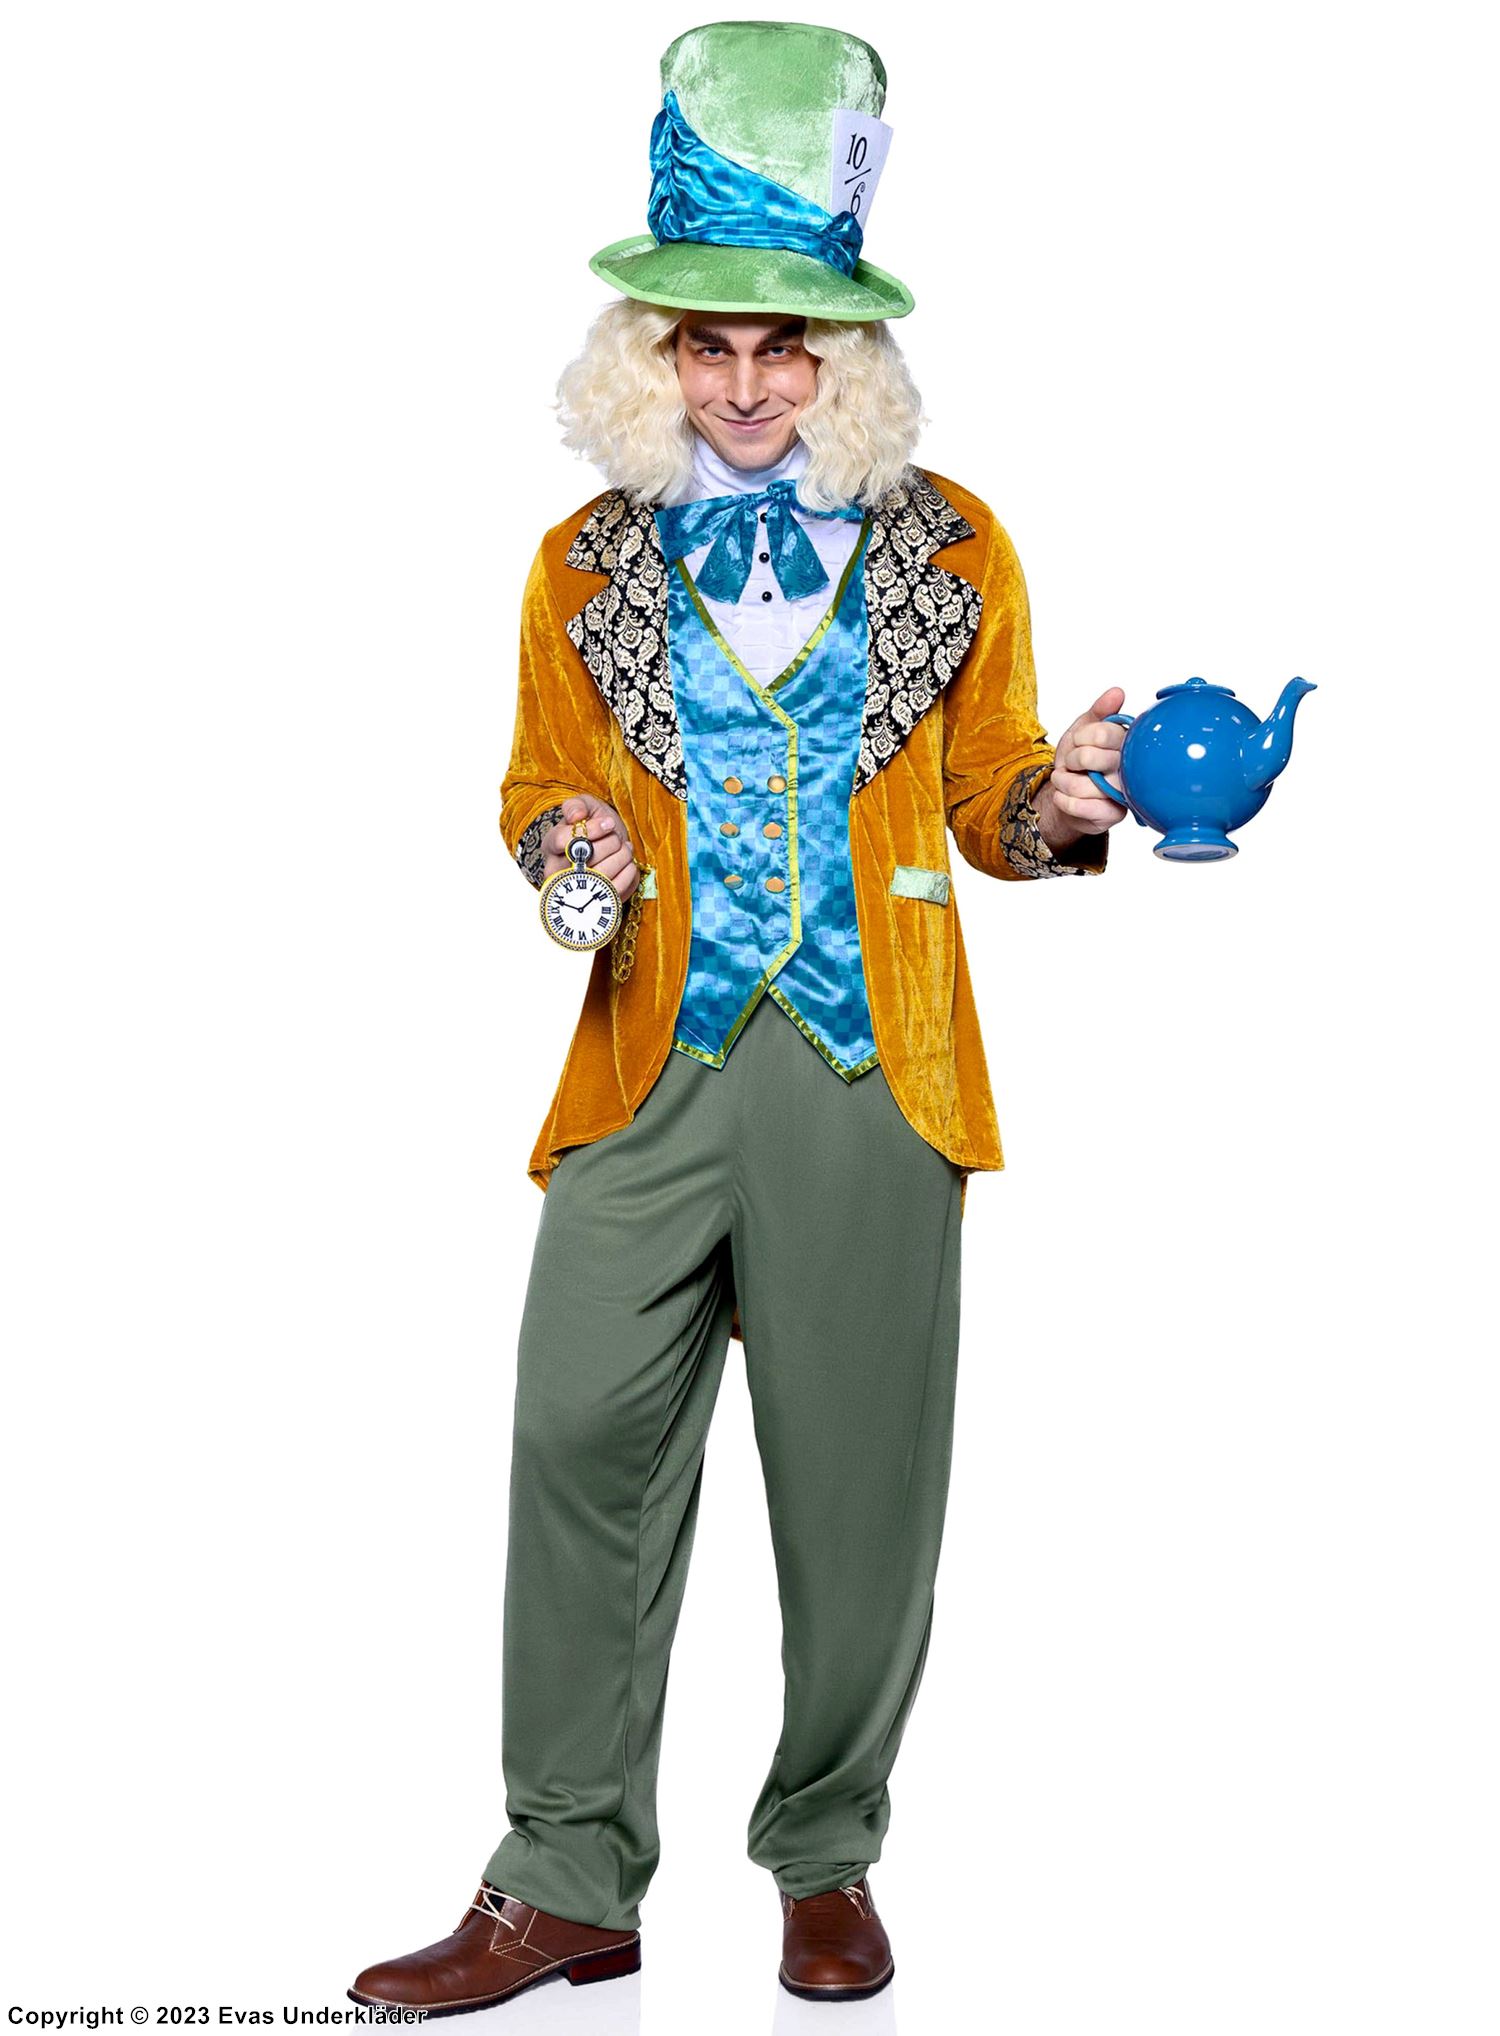 Mad Hatter, costume top and pants, brocade, buttons, velvet